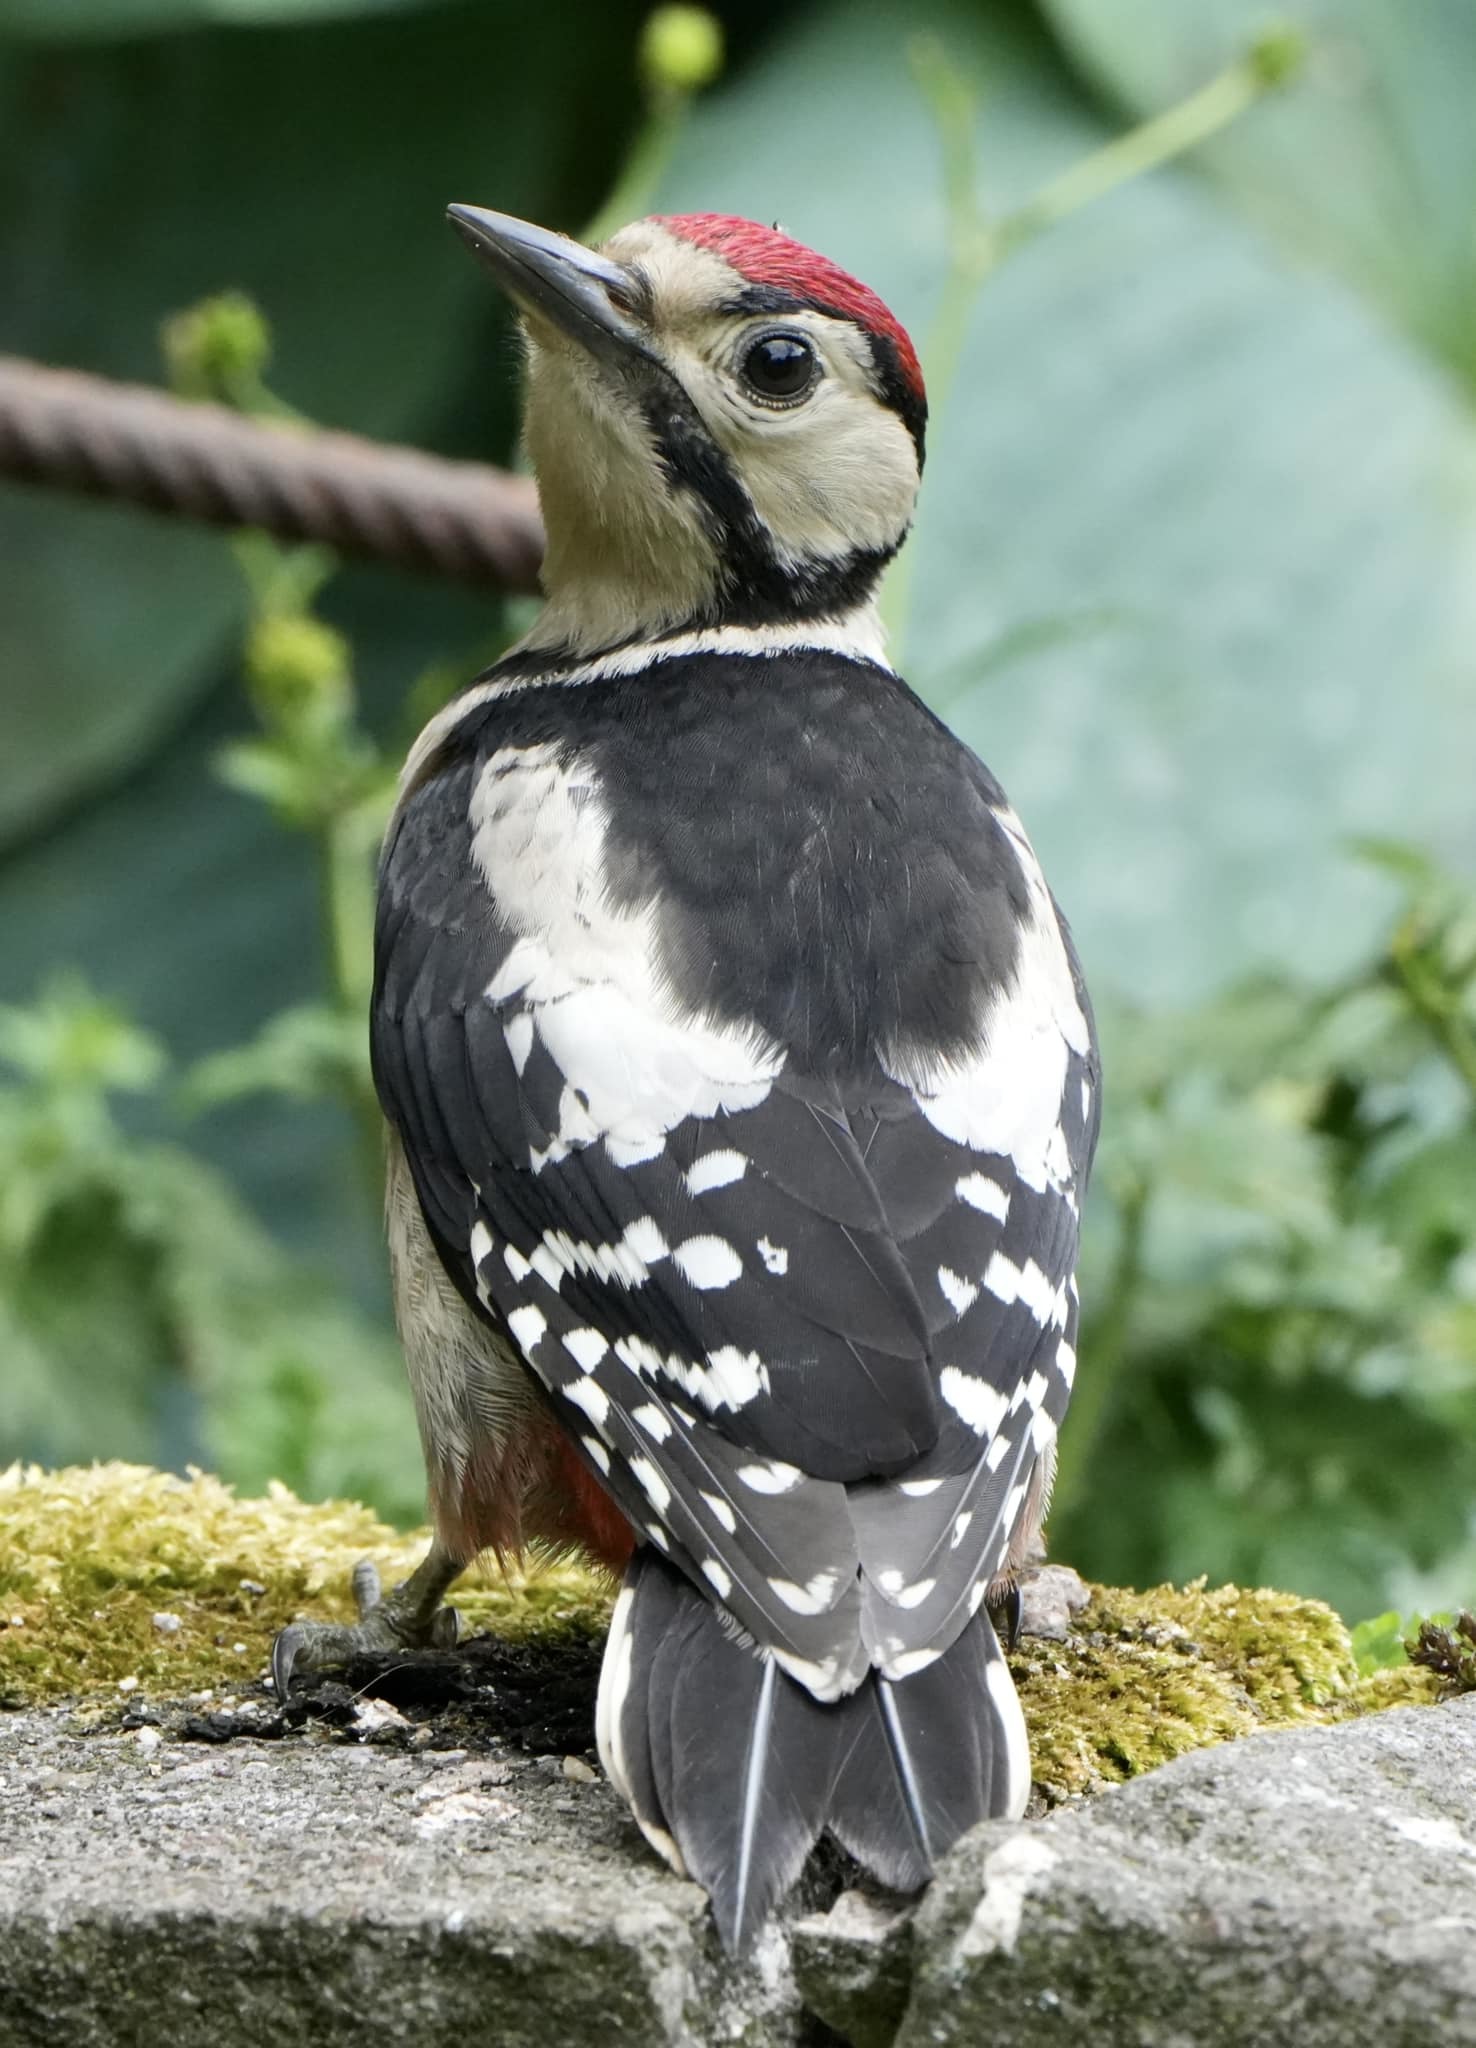 A juvenile great spotted woodpecker by Andy Conboy